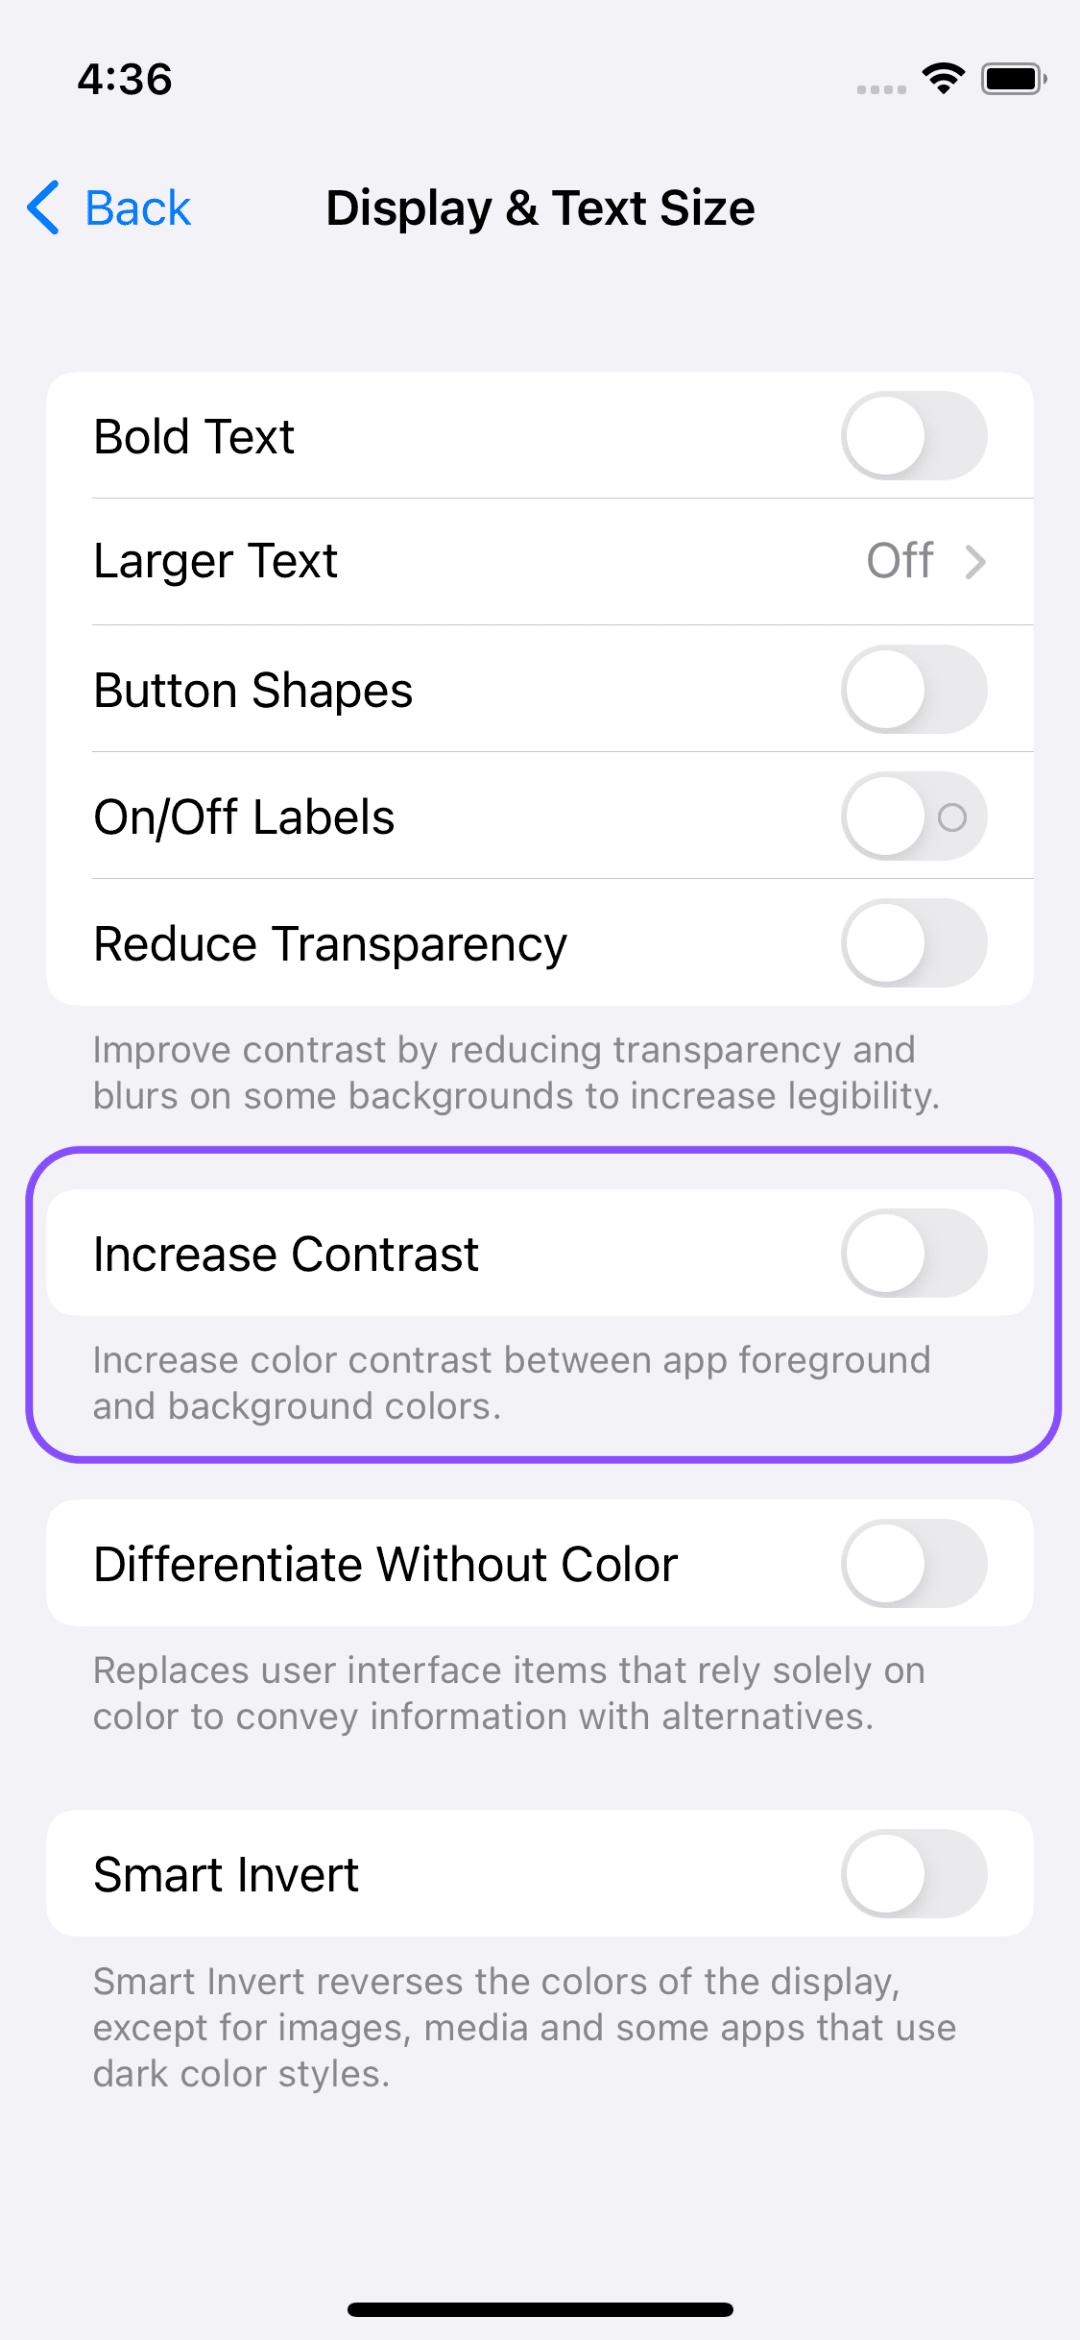 The increase contrast setting in iOS.